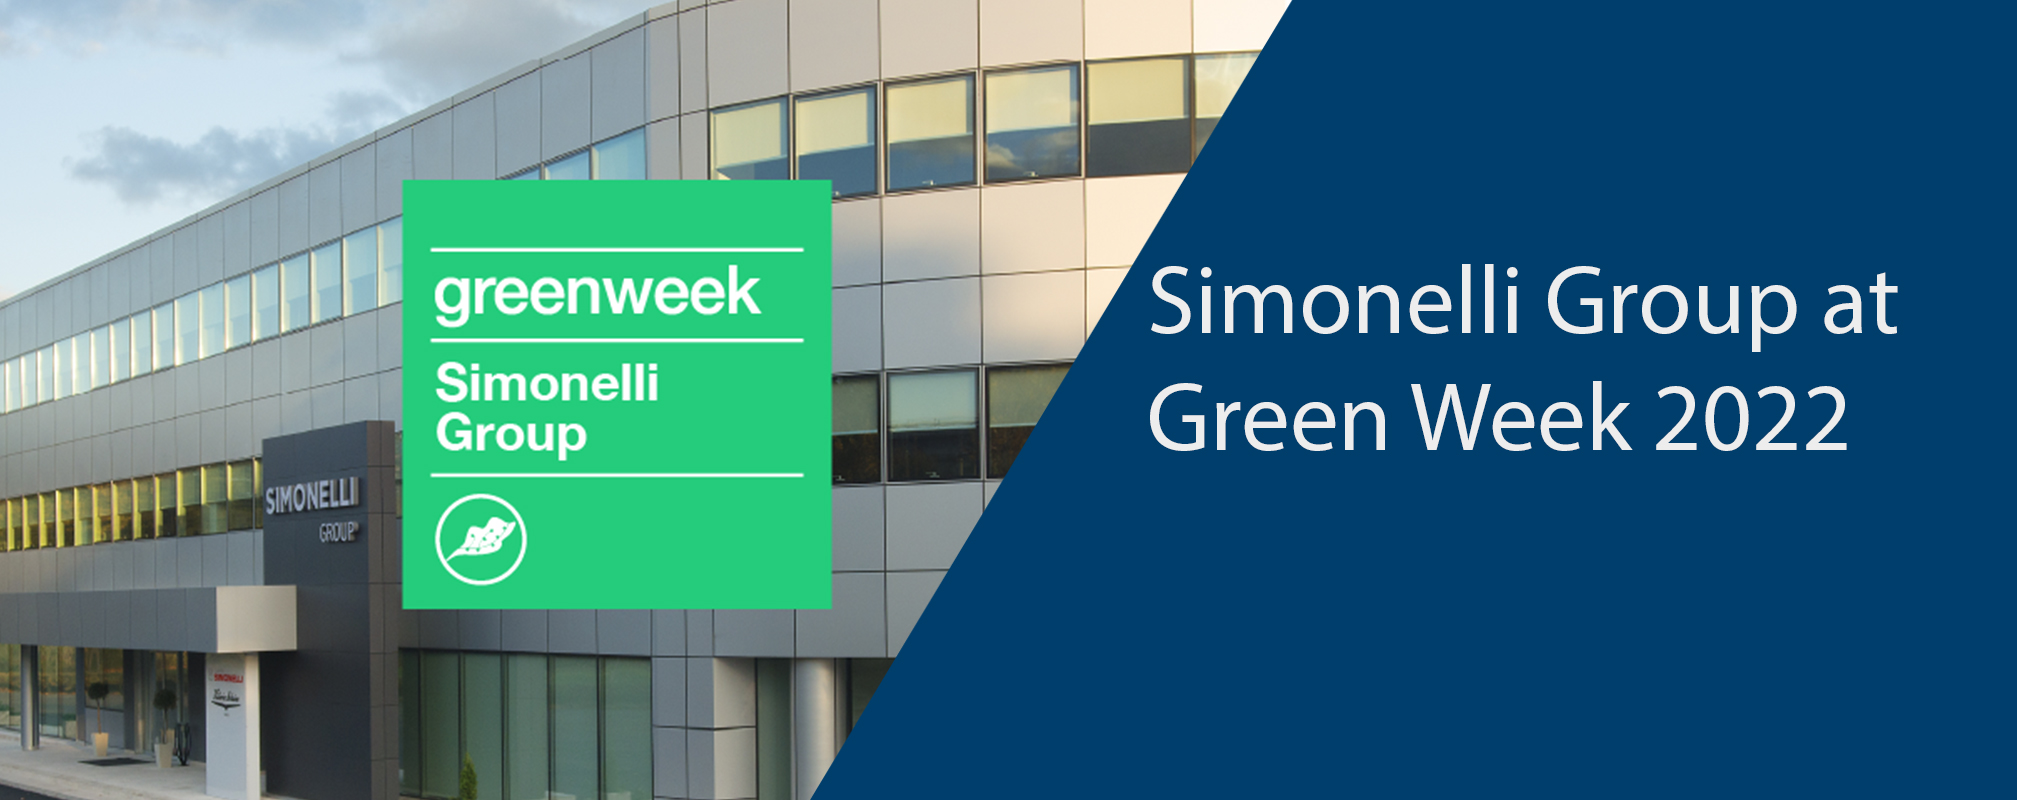 Simonelli Group at Green Week 2022